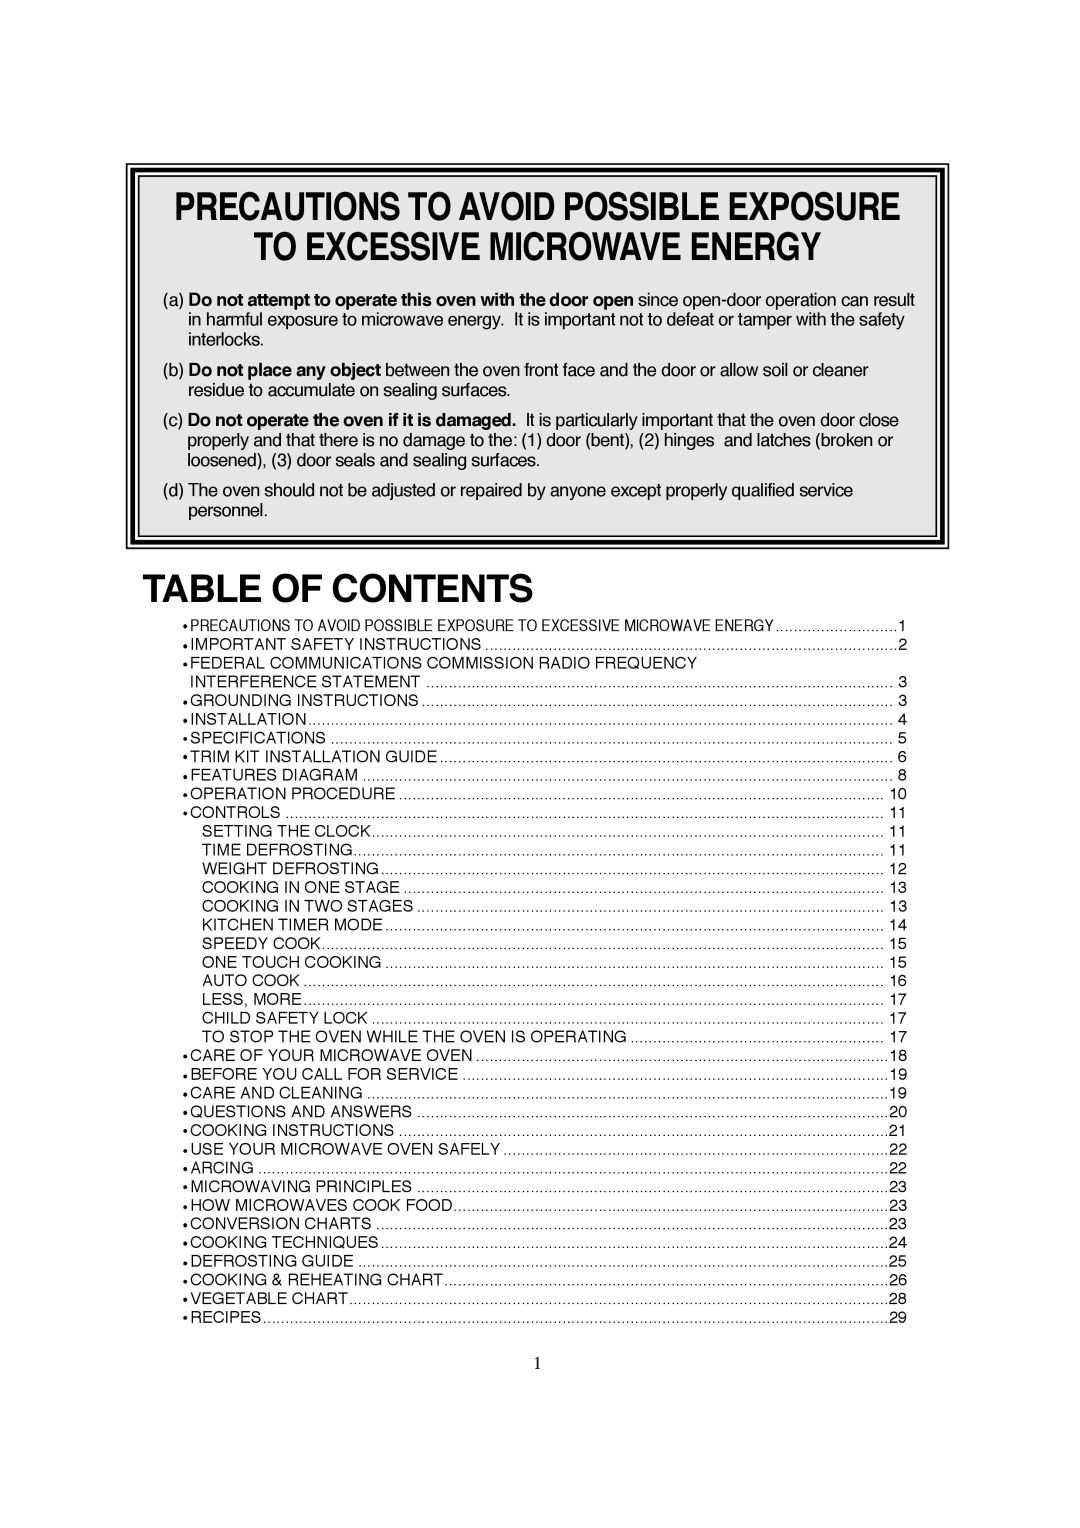 Magic Chef MCD990ARB, MCD990ARW Precautions To Avoid Possible Exposure To Excessive Microwave Energy, Table Of Contents 